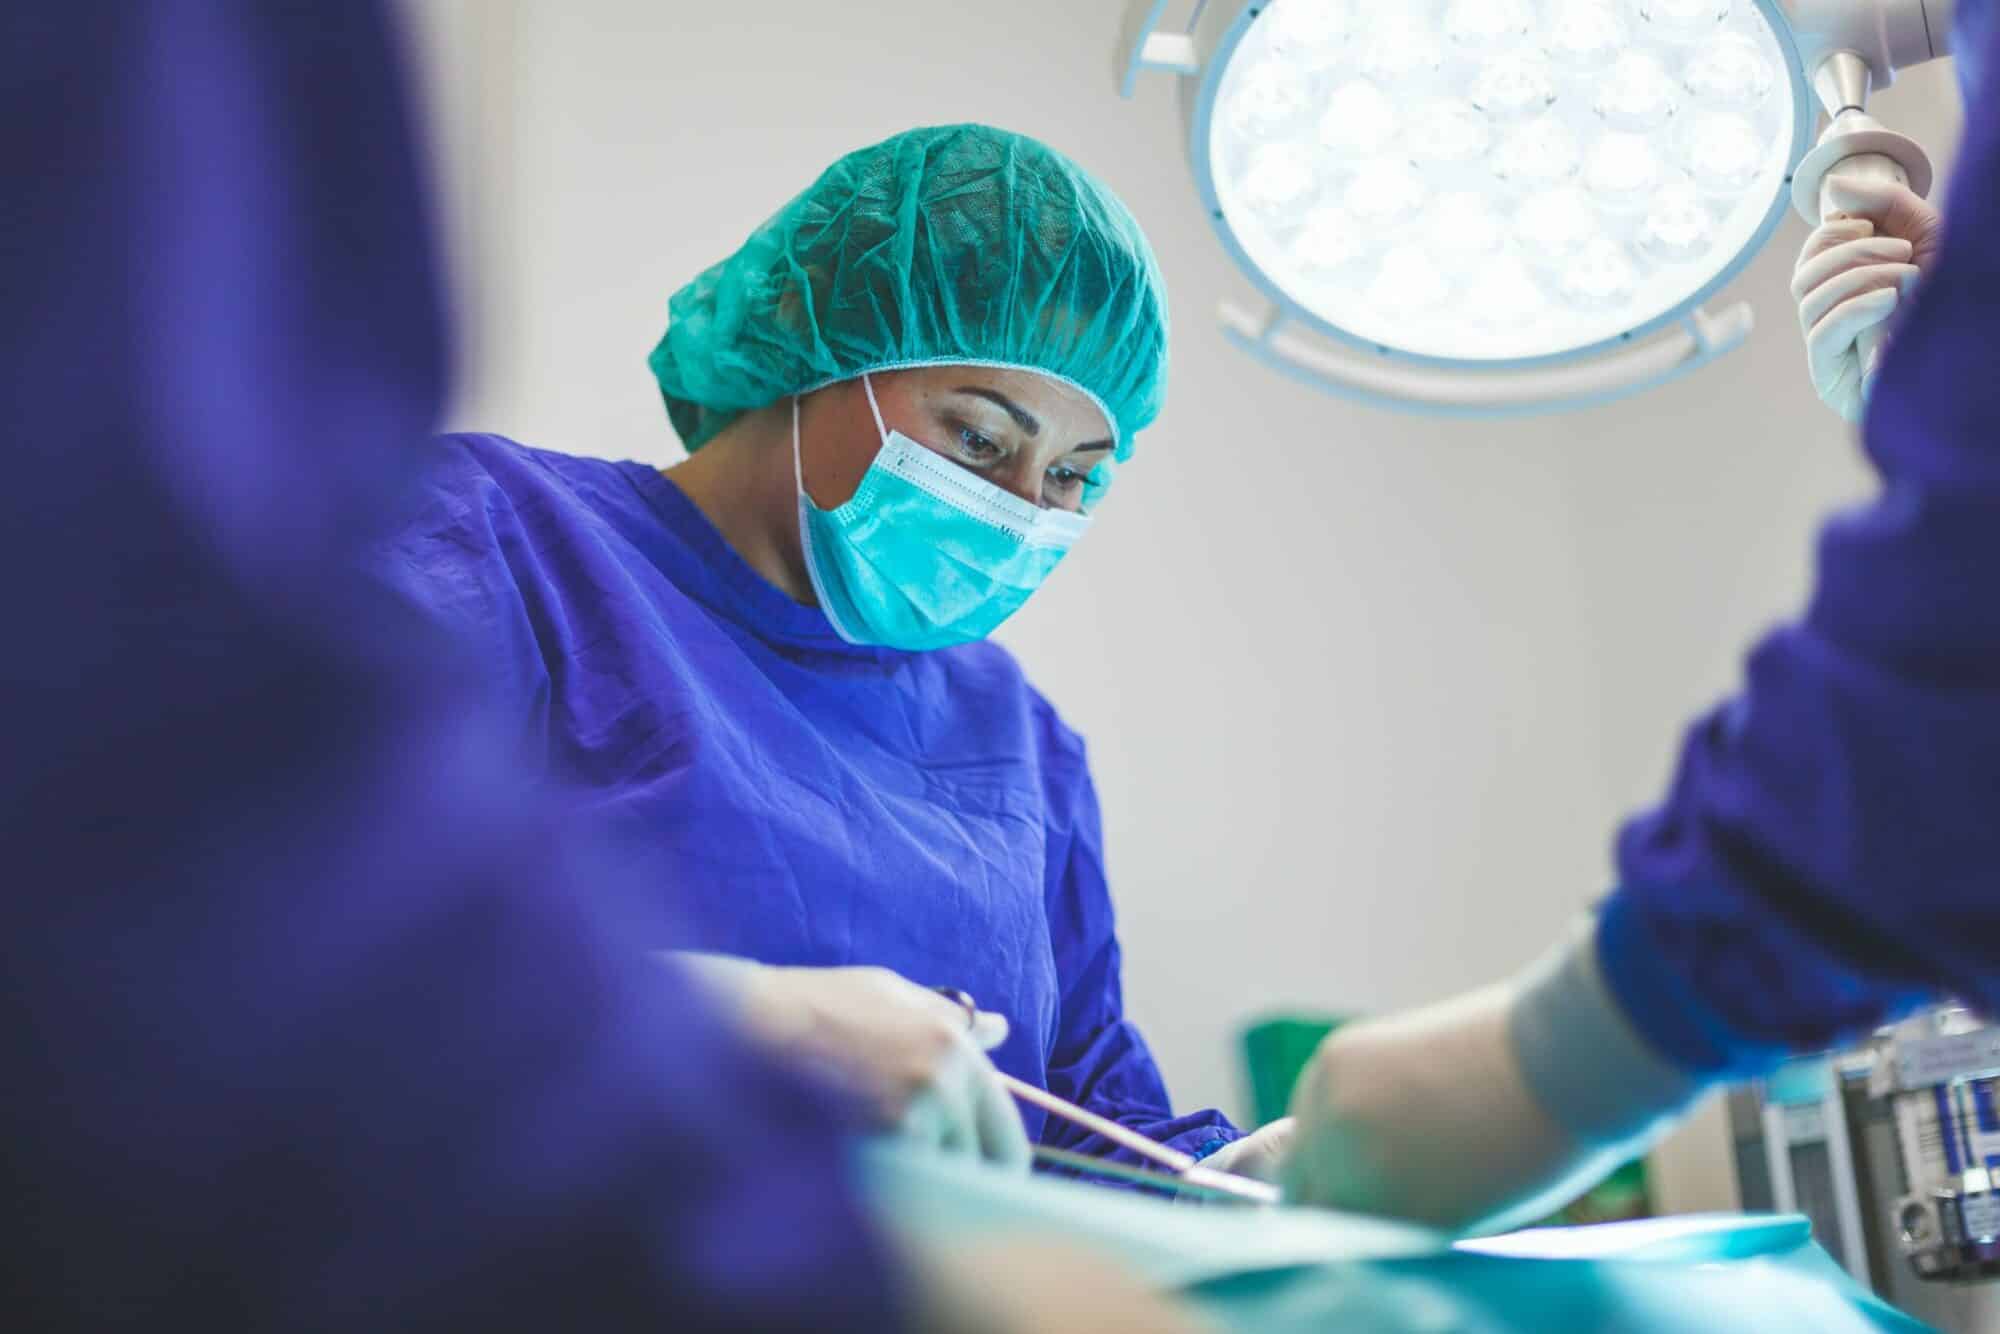 NHS surgeon operates on a patient